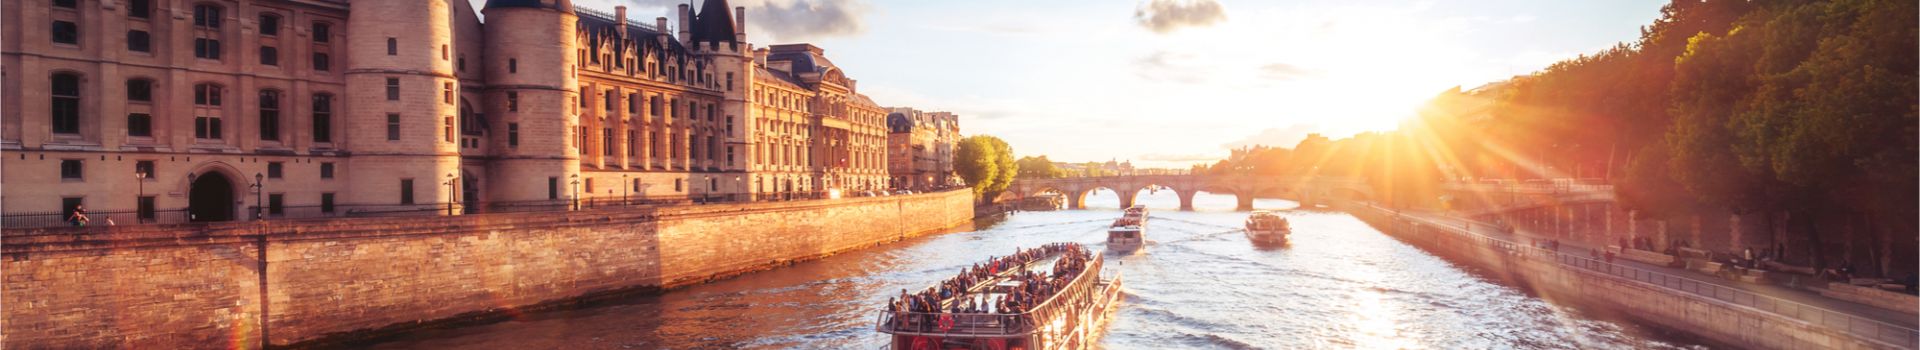 Why book a river cruise holidays - Cassidy Travel Blog